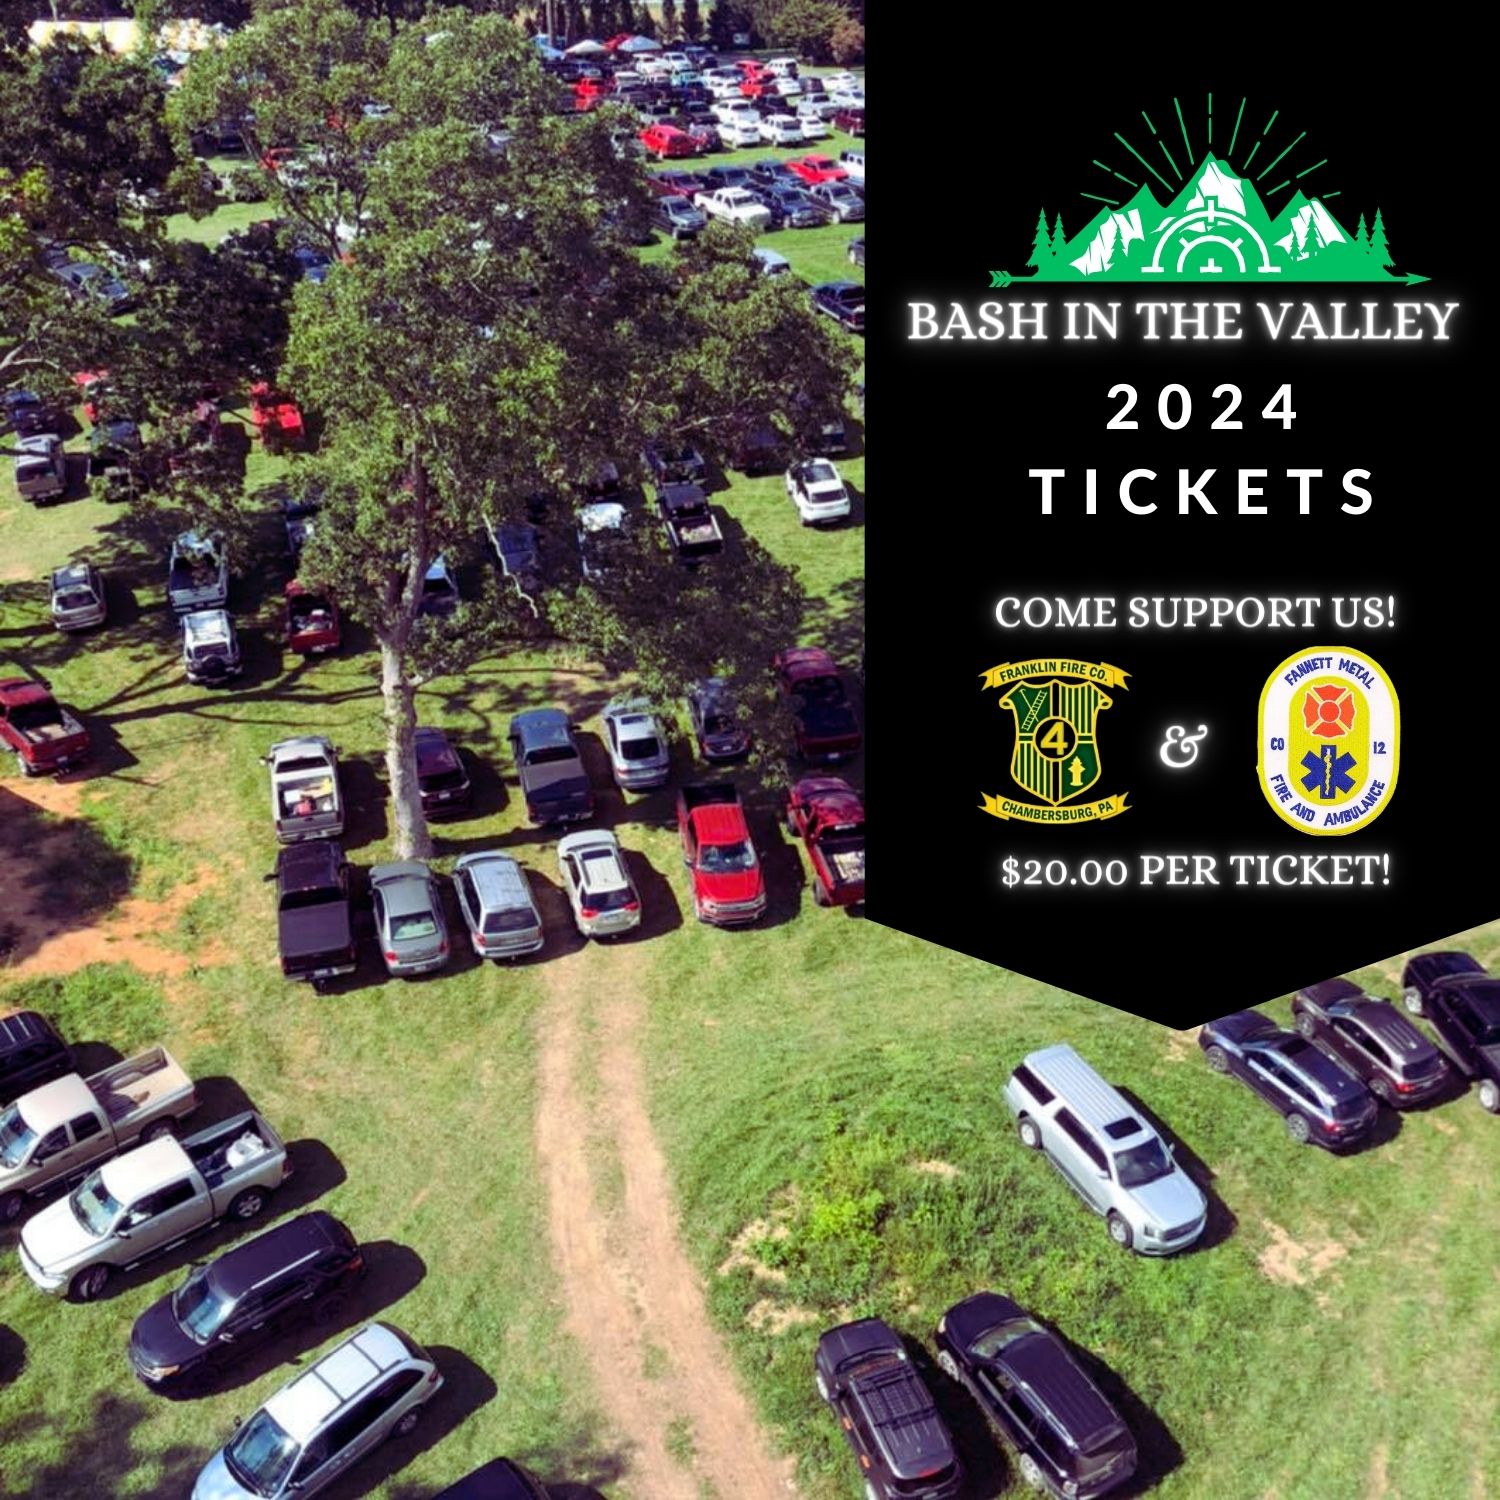 Bash in the Valley 2024 Ticket